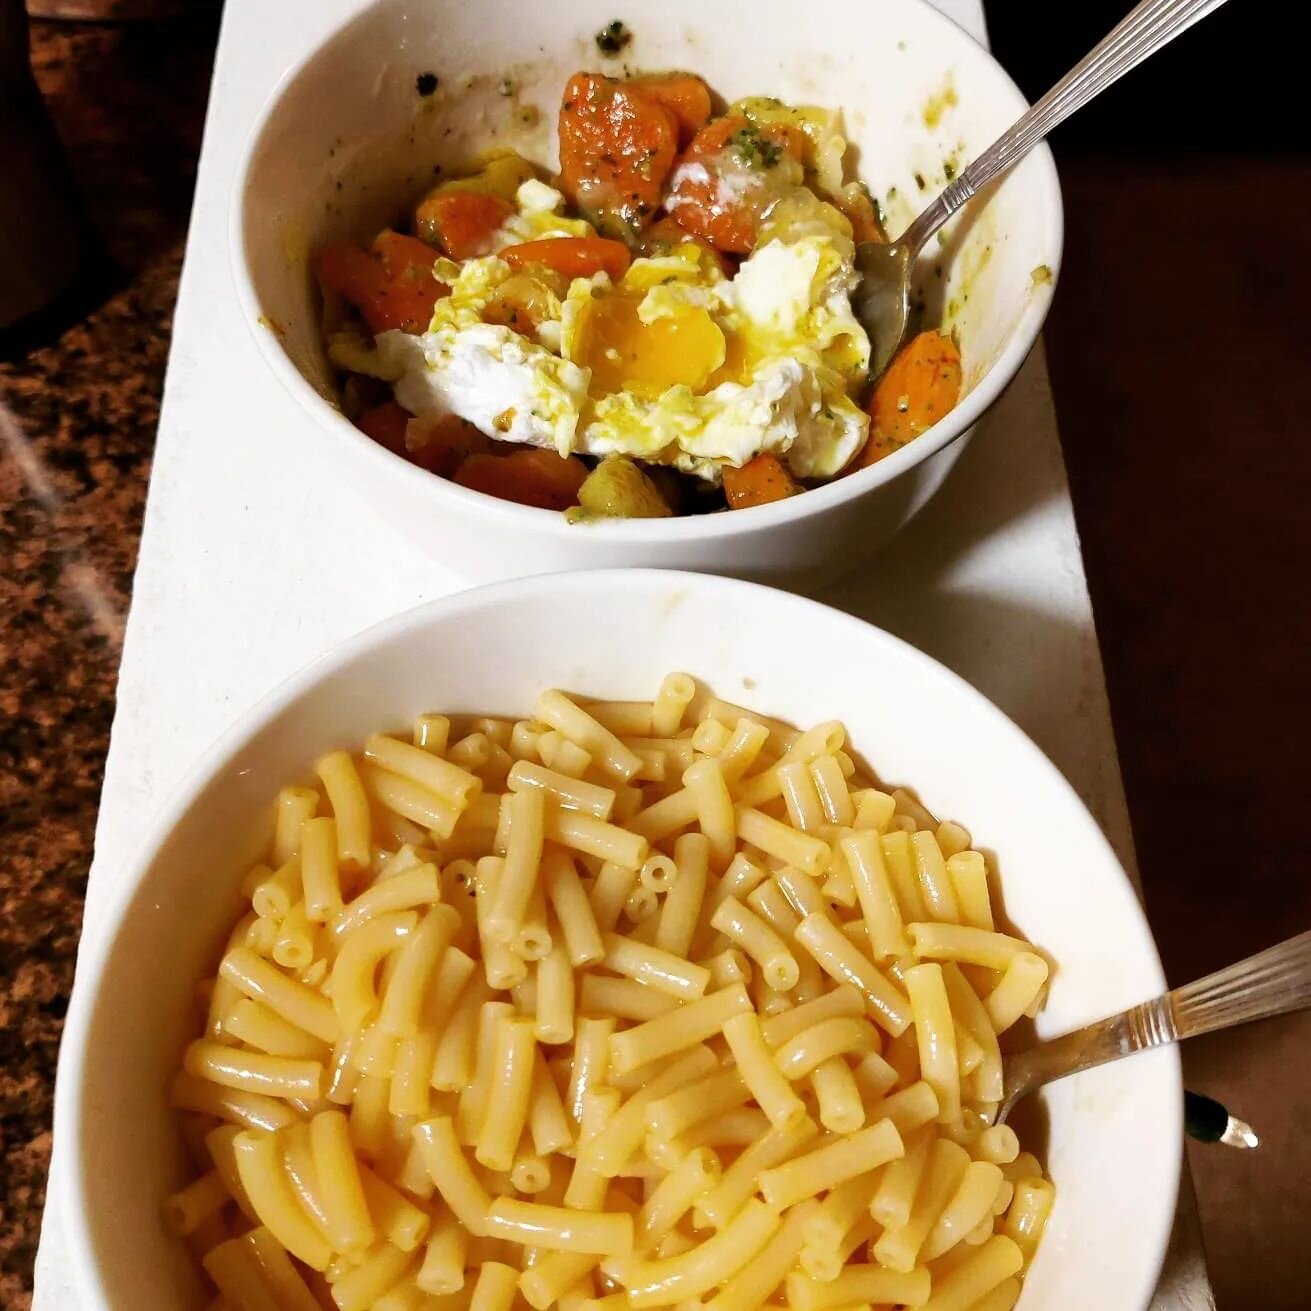 Our &quot;fend for yourself&quot; supper this evening, which took both of us a total of 15 minutes.  My bowl (on the top) is holiday shaped gnocchi with a homemade pesto and a poached egg. Caleb's is a box of store brand Mac and cheese.